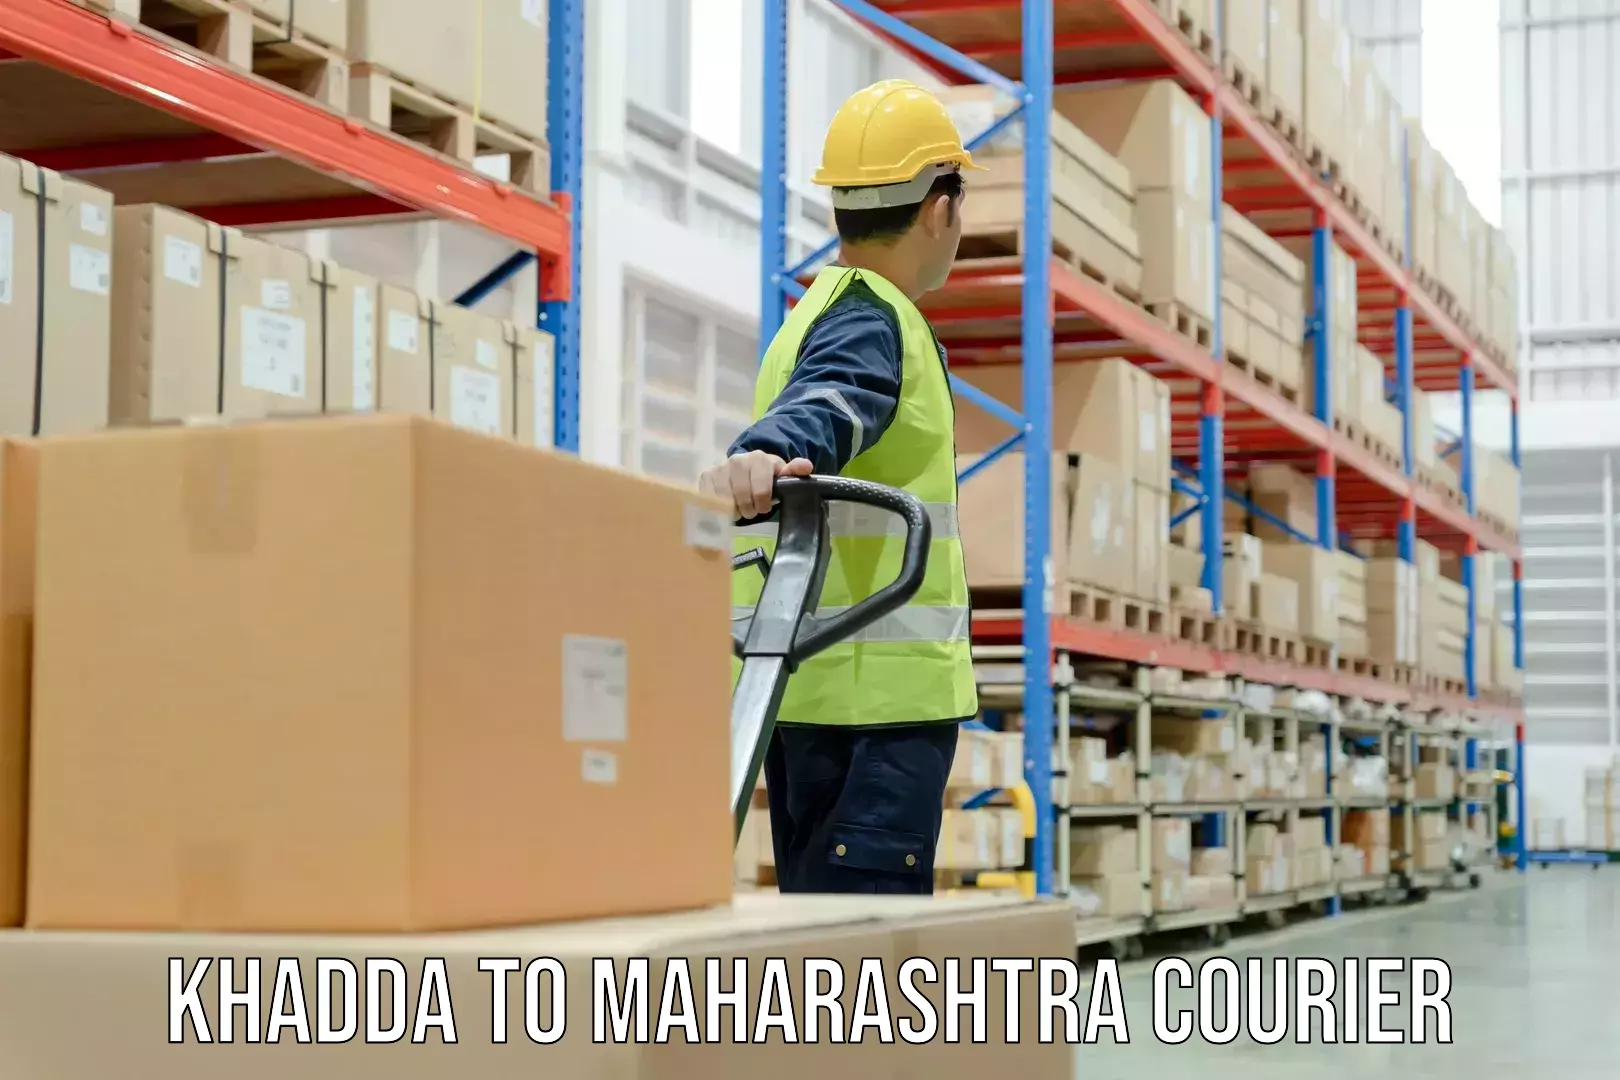 Online courier booking in Khadda to Maharashtra